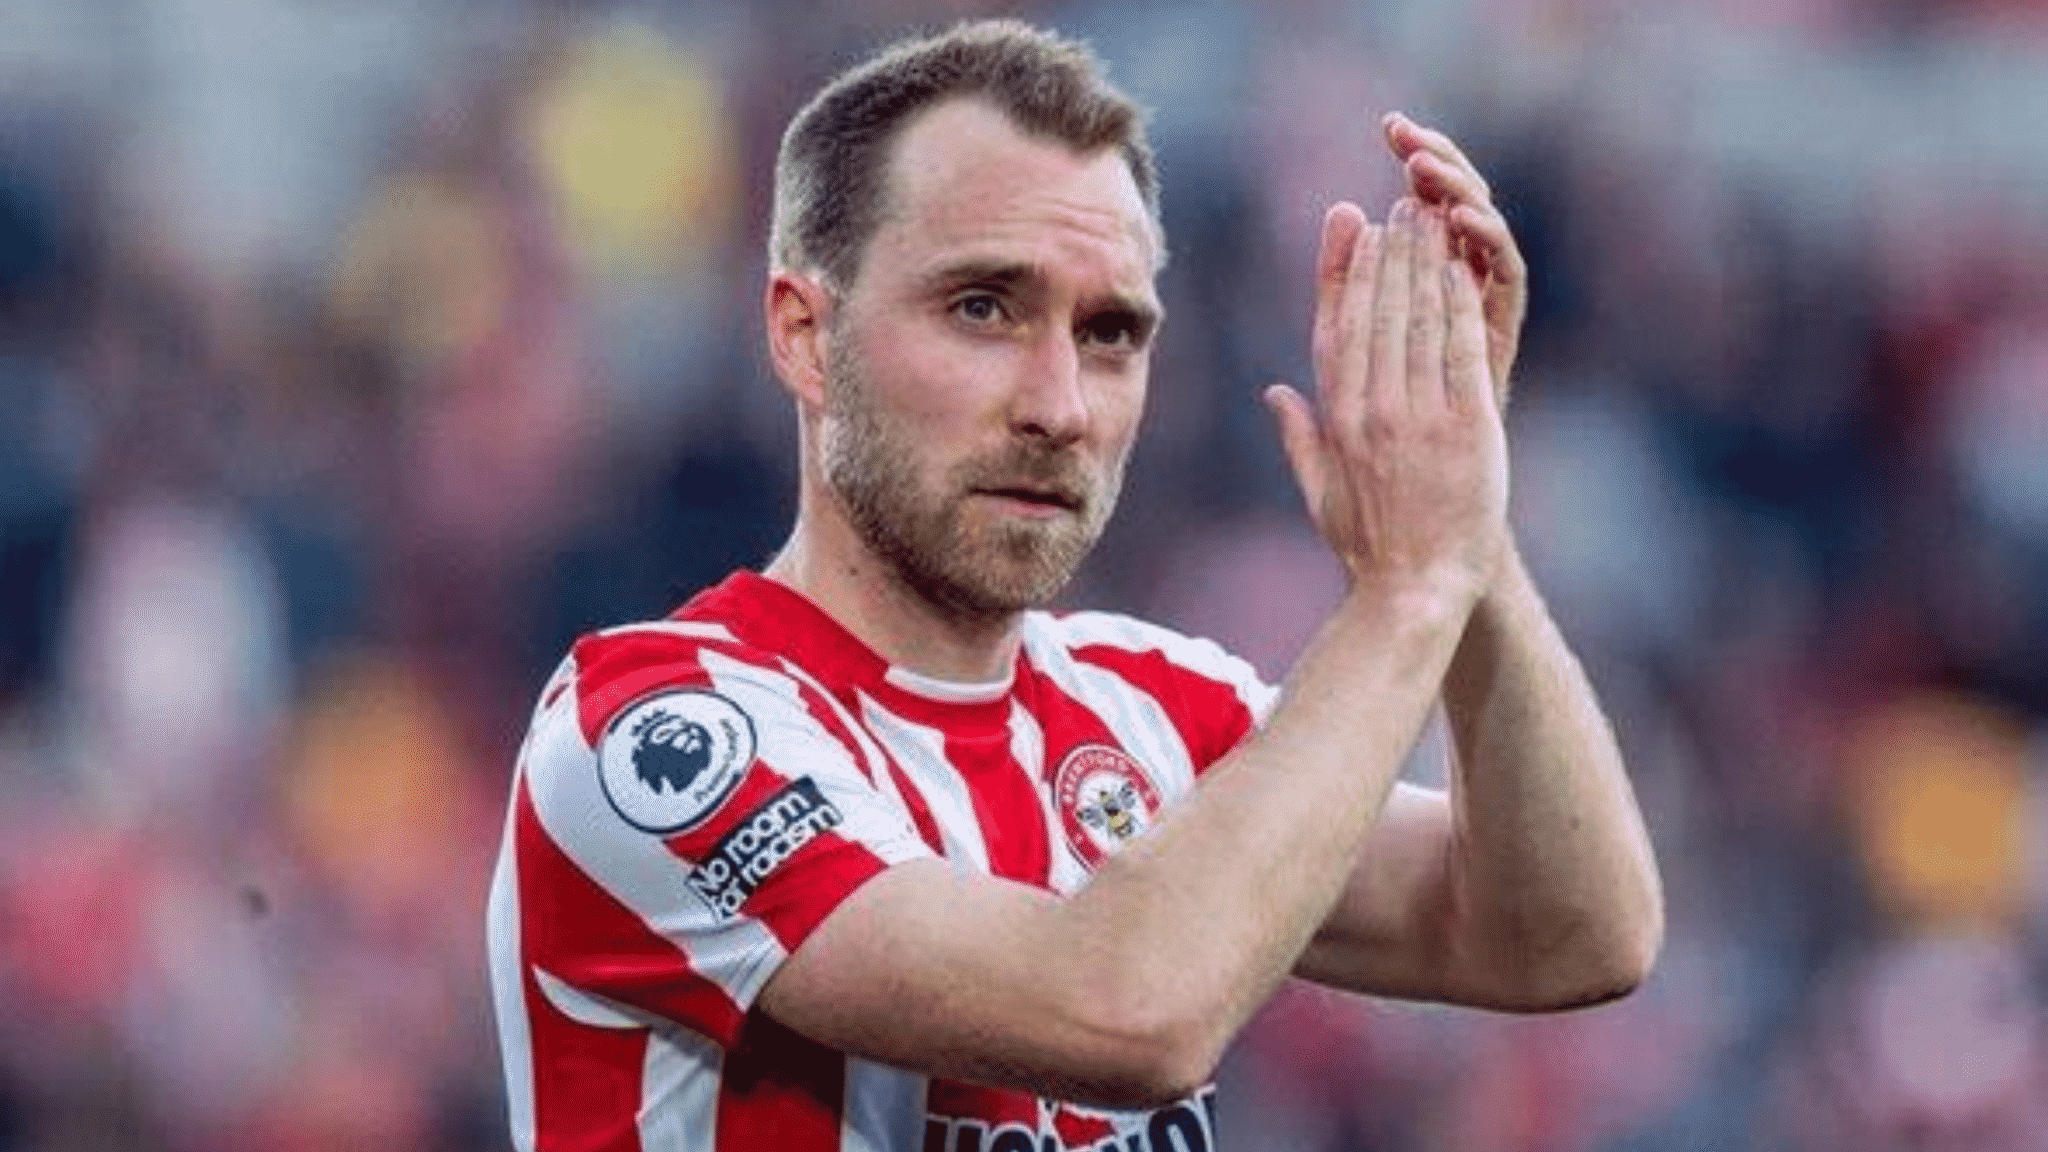 Thomas Frank tempts Christian Eriksen with statue for Brentford stay, My Football Facts